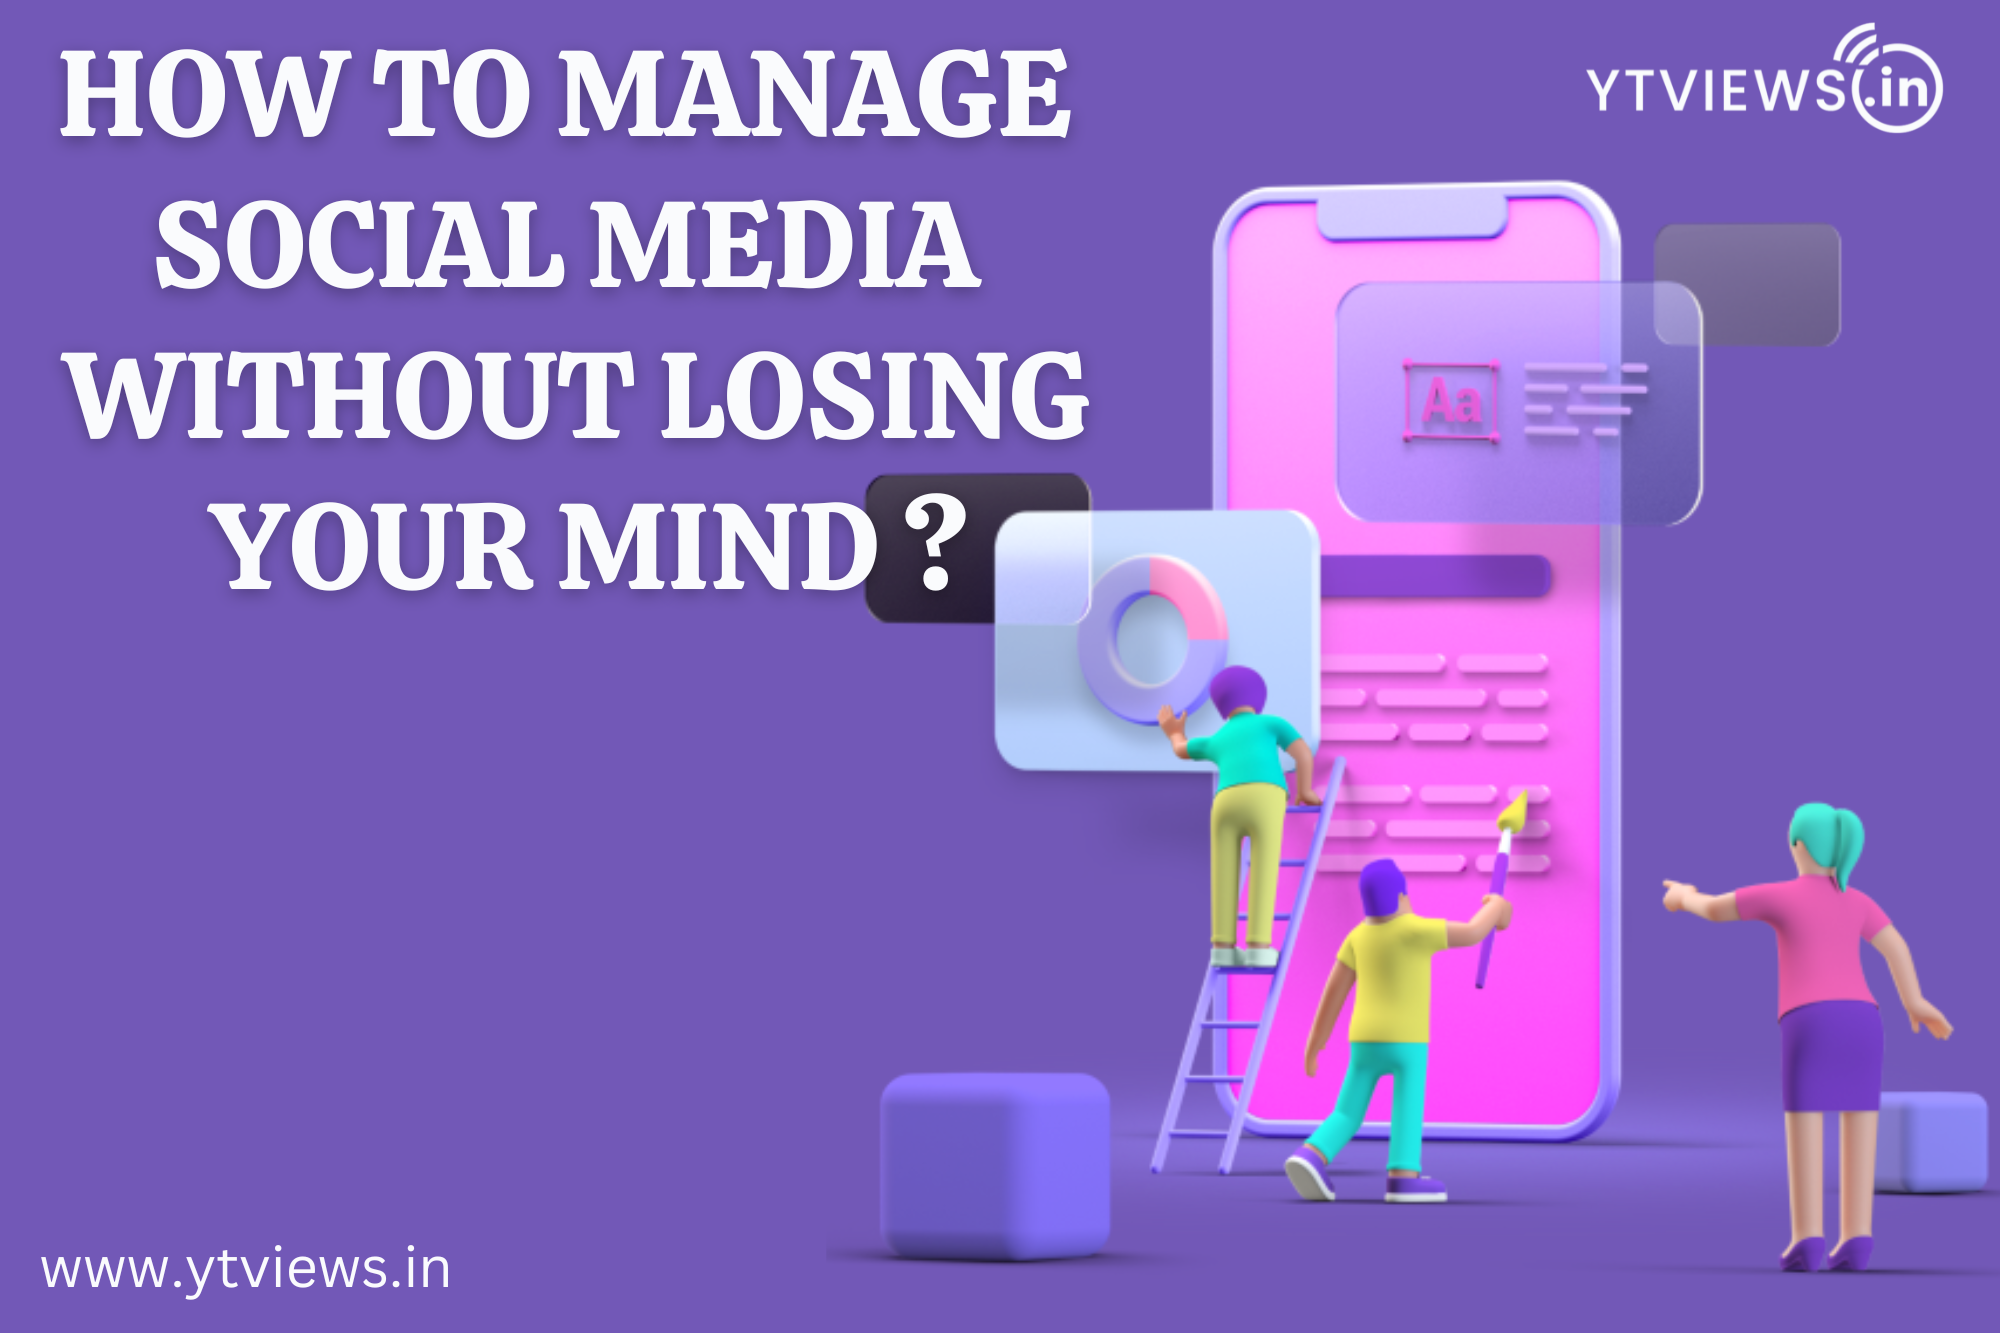 How to manage social media without losing your mind